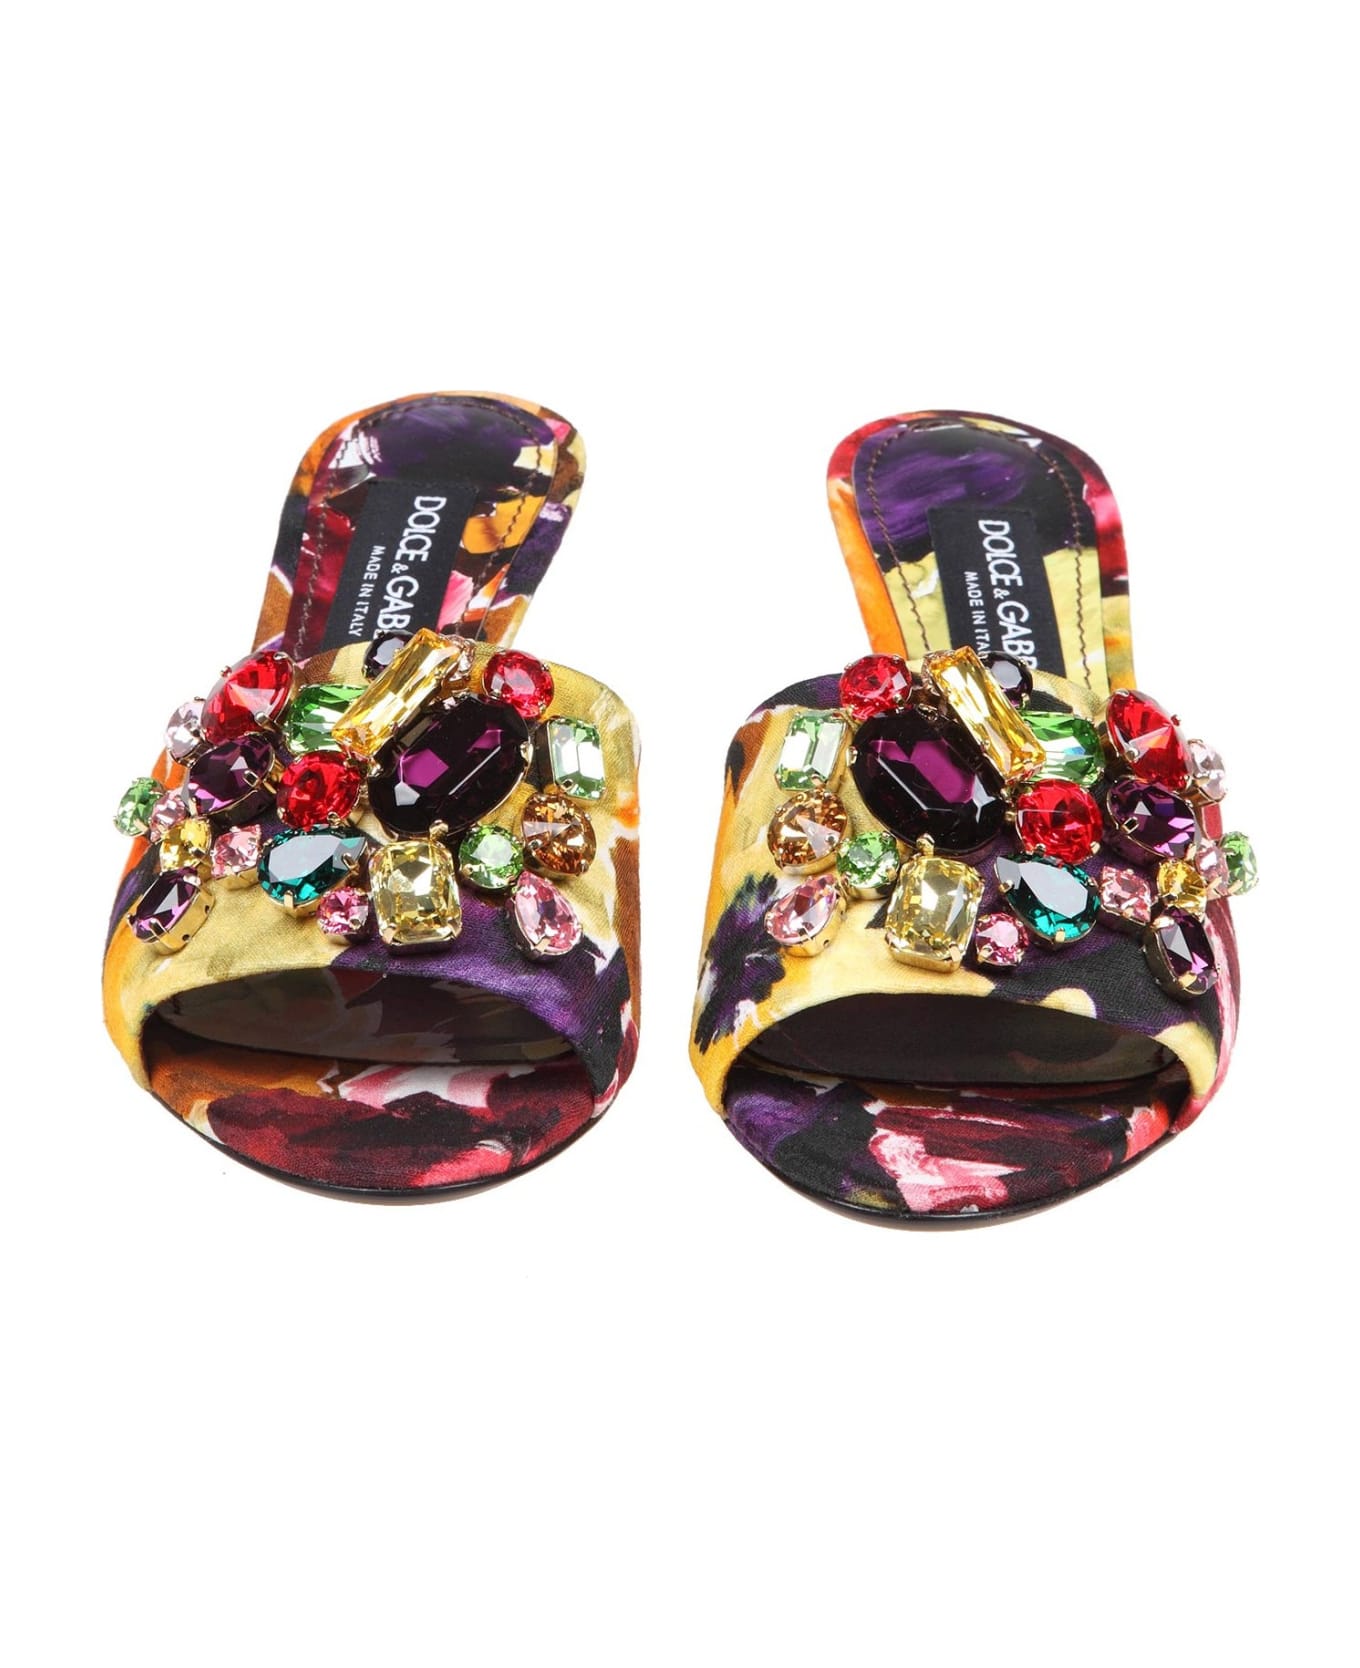 Dolce & Gabbana Slippers In Brocade Fabric With Colored Stones - Yellow